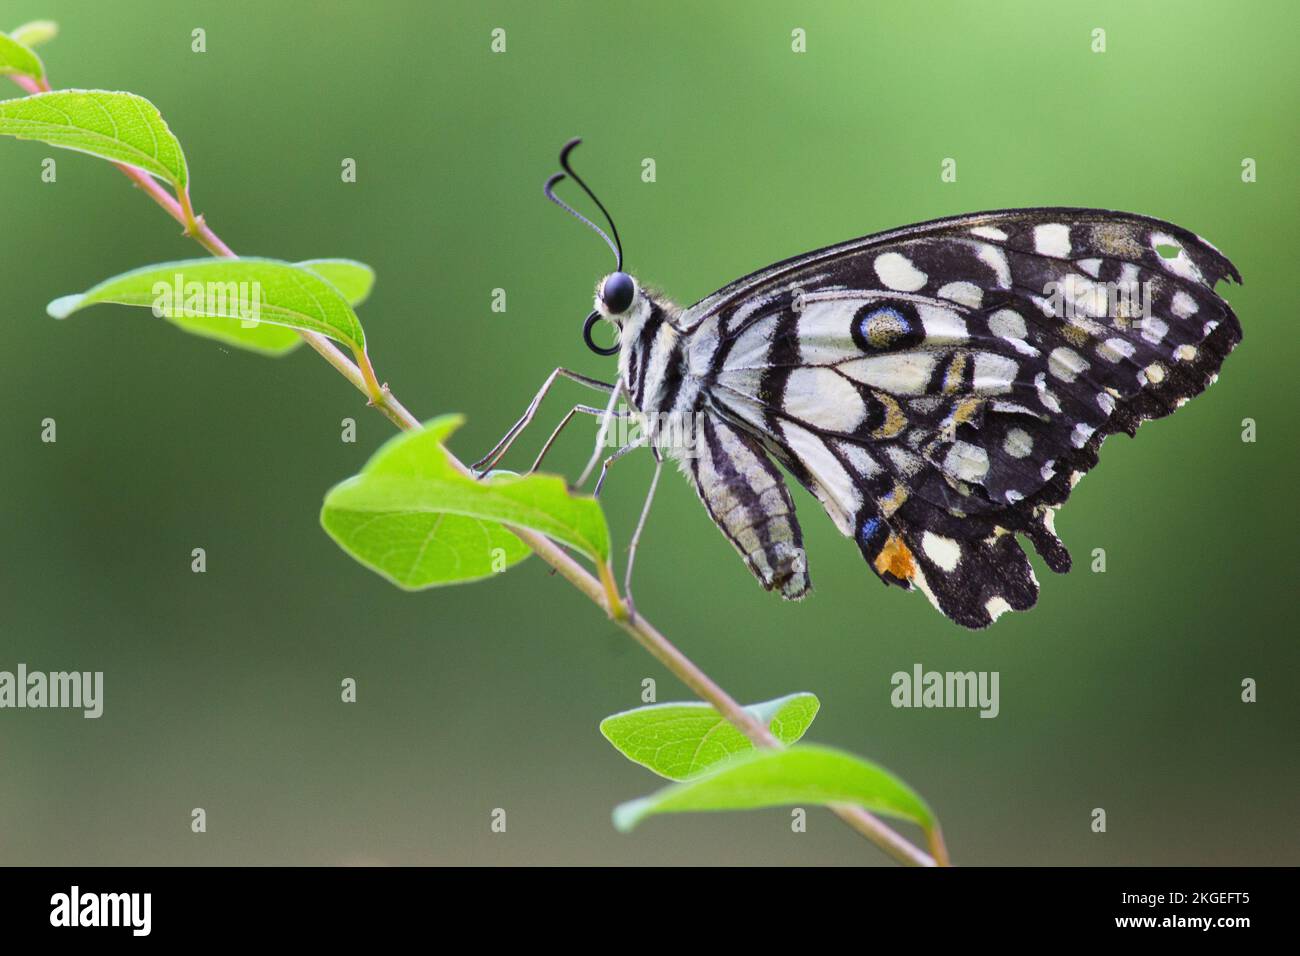 Wildlife Macro picture of Papilio butterfly or The Common Lime Butterfly resting on the flower plant in its natural habitat against green background Stock Photo